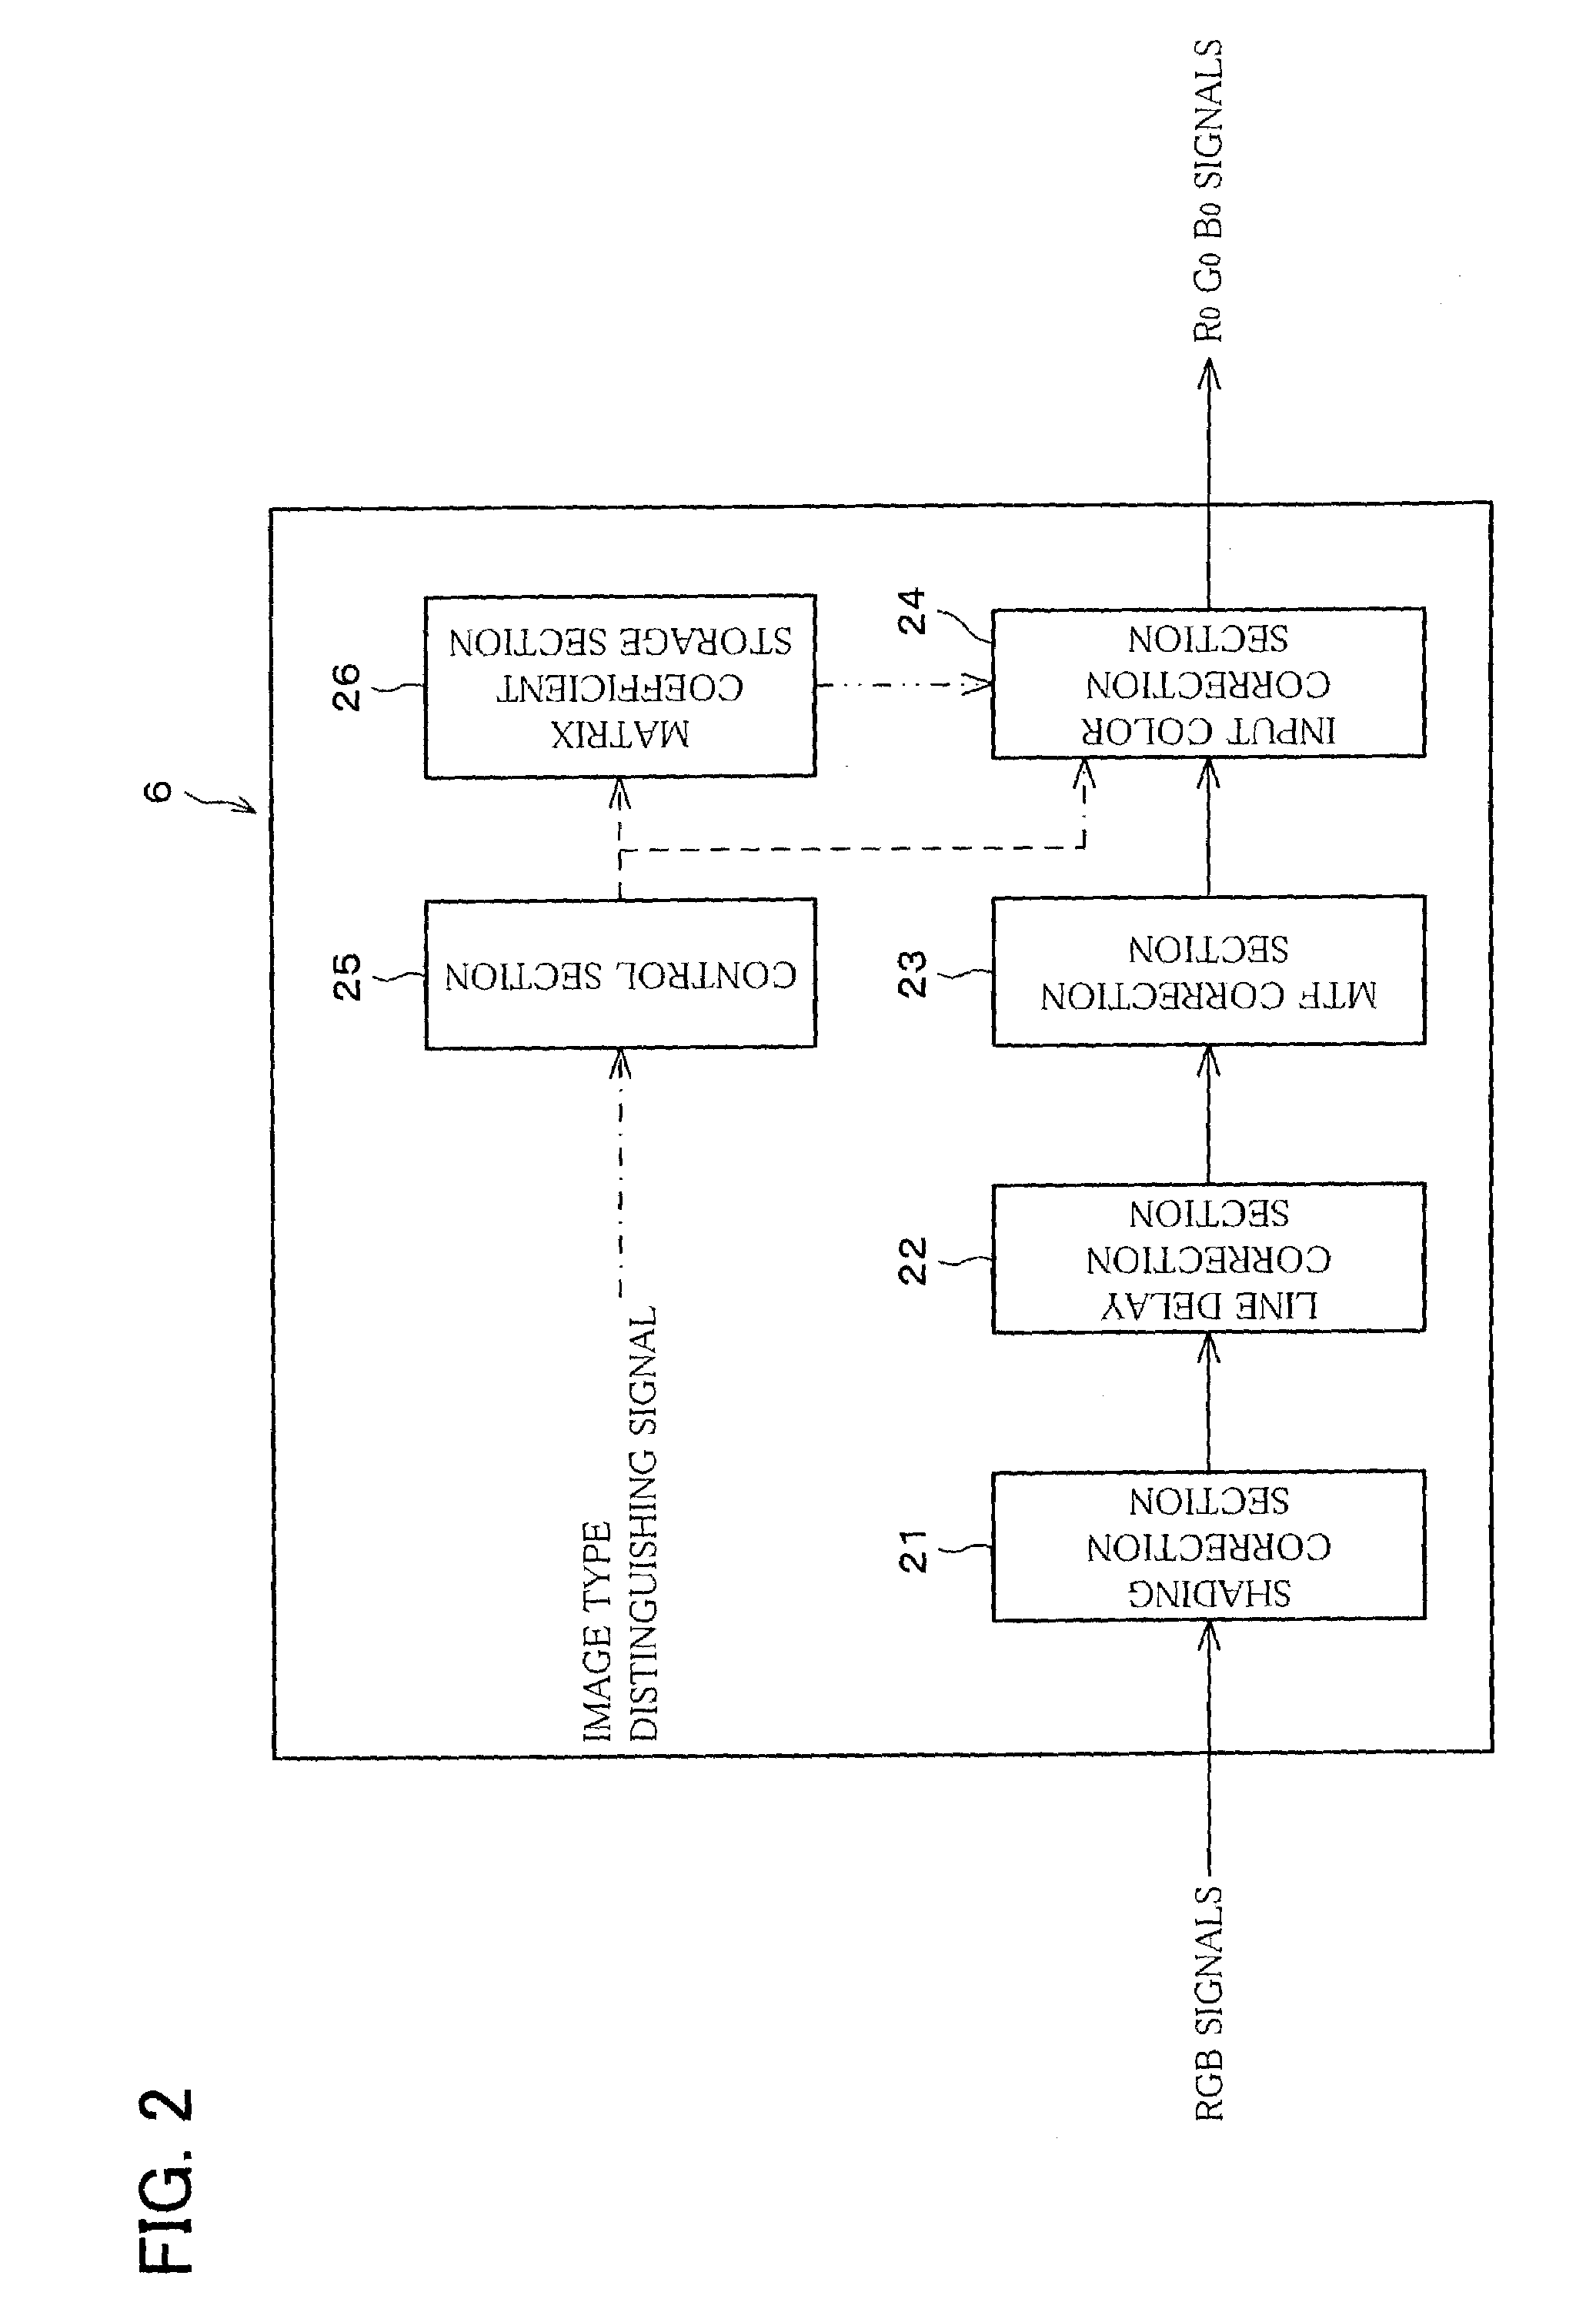 Image processing device, image forming device, image processing method, image processing program, and recording medium containing the image processing program recorded thereon